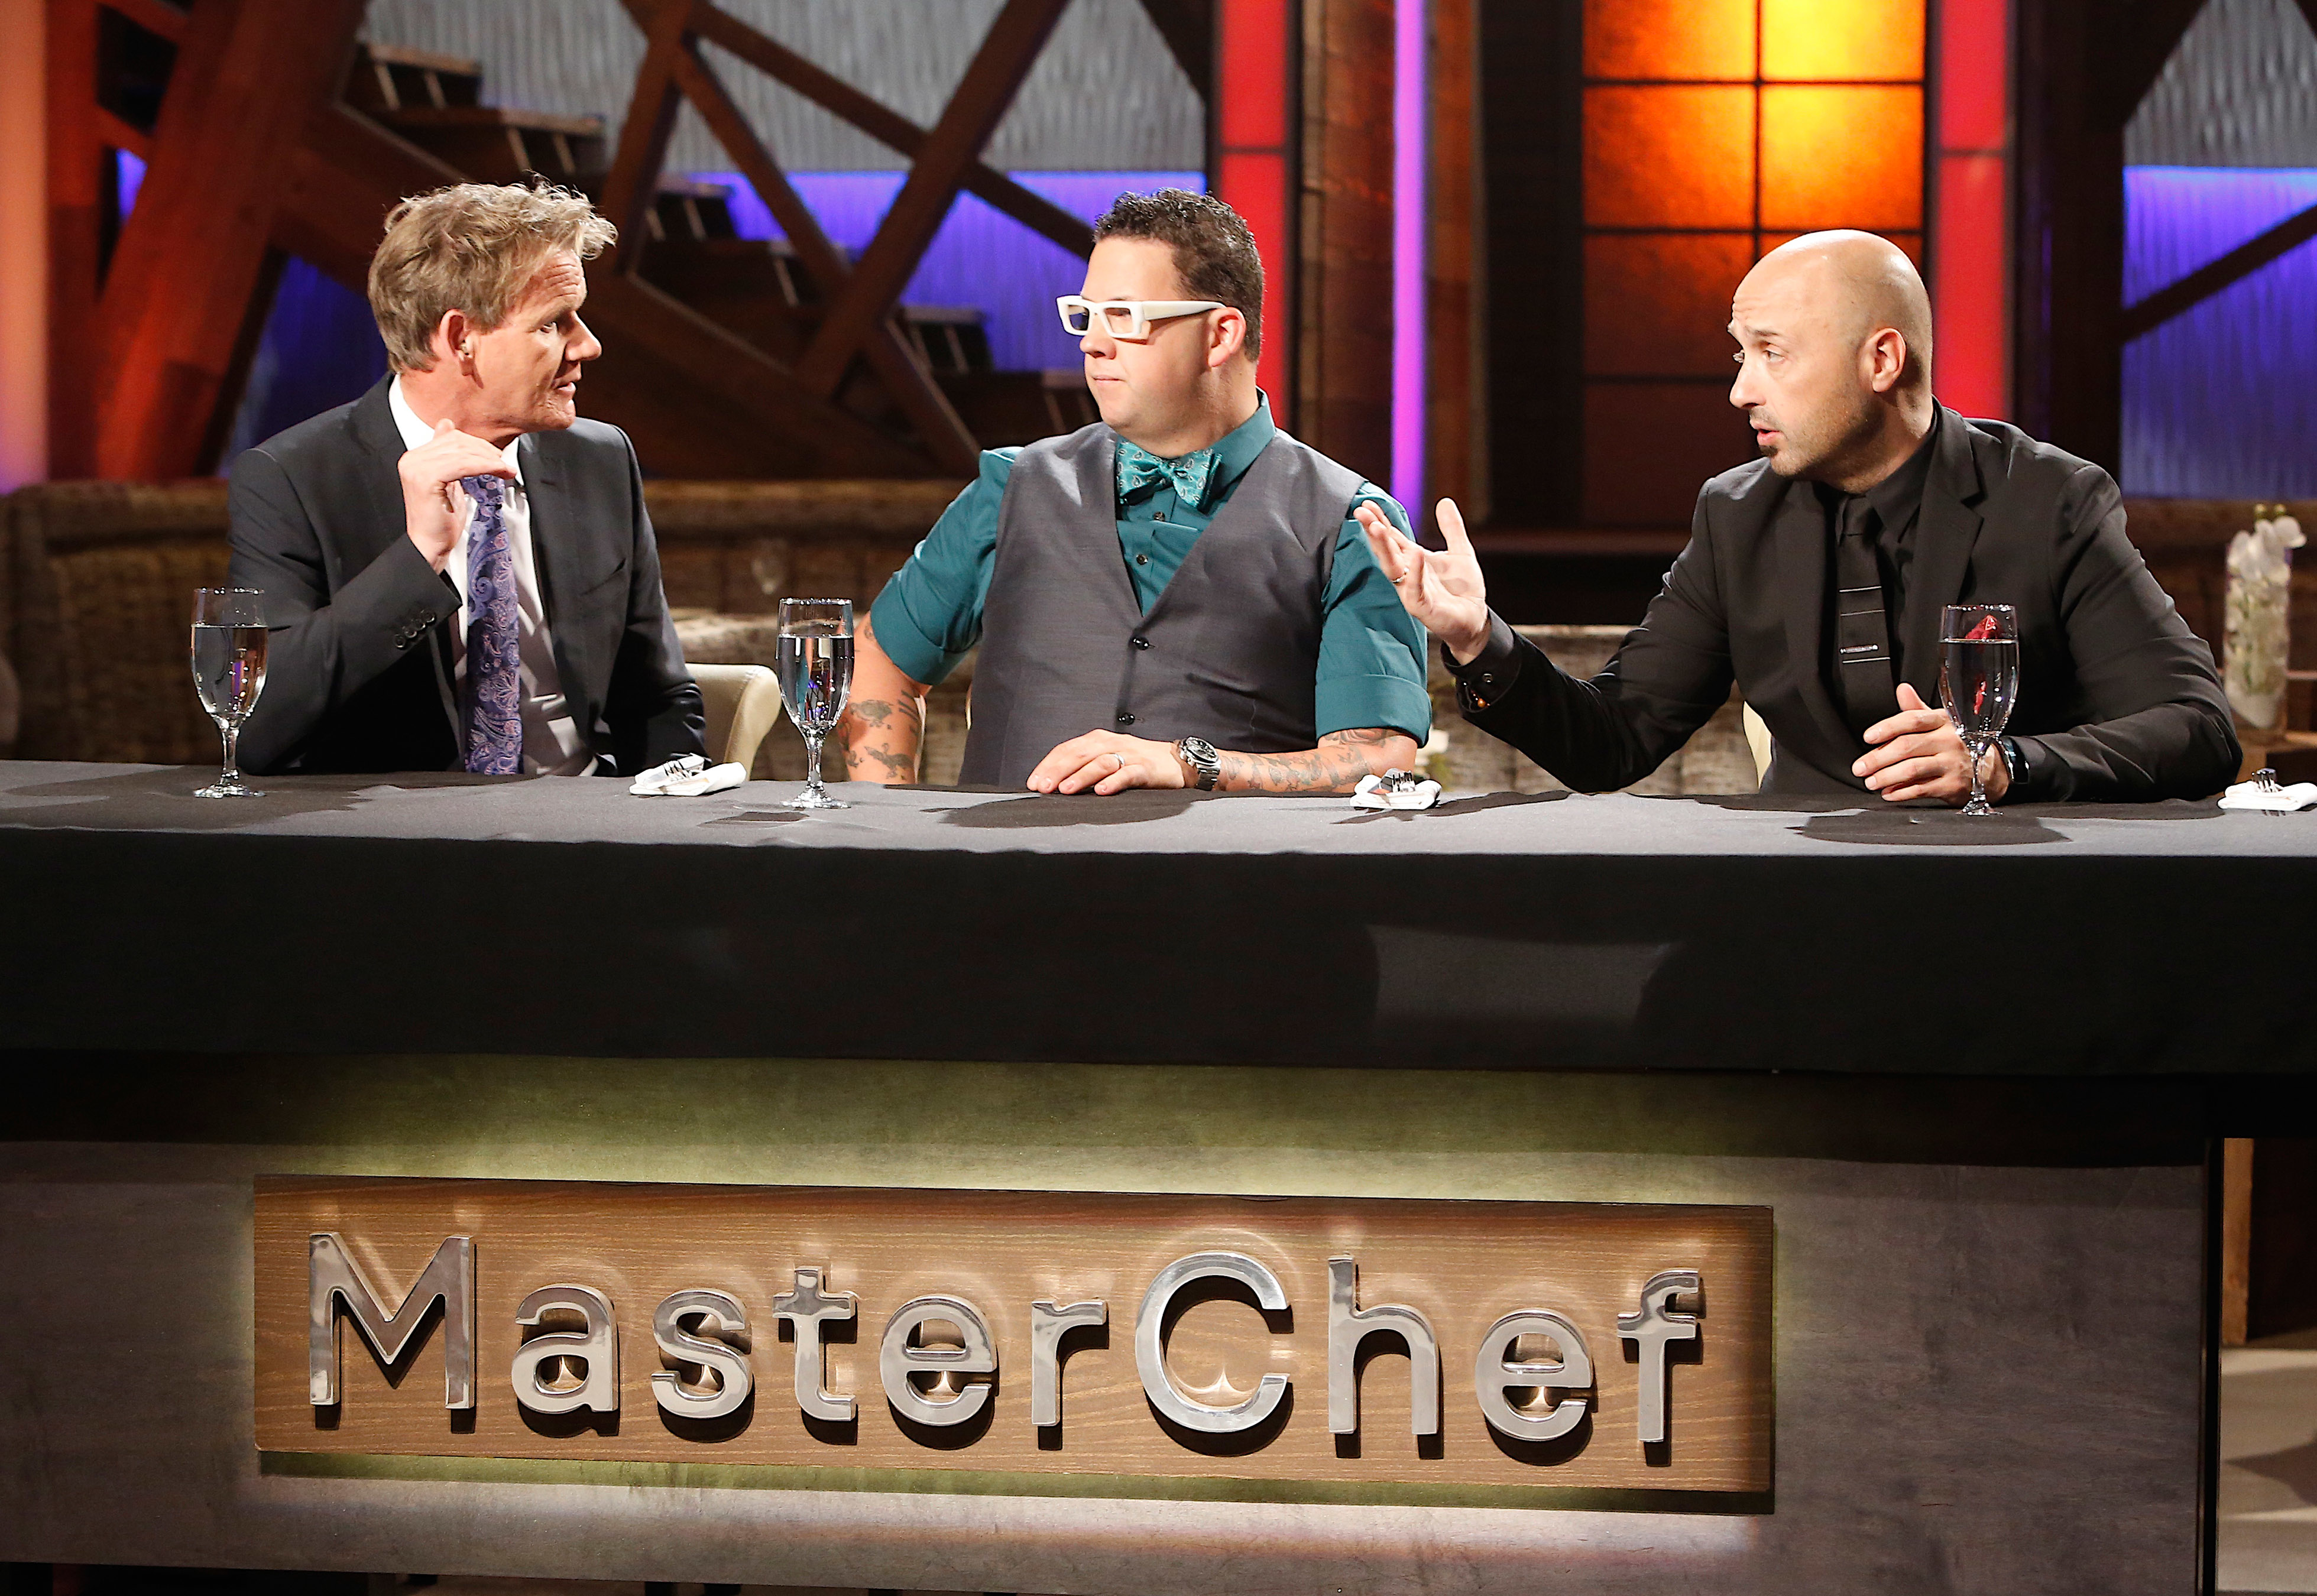 Three judges sit behind the &#x27;MasterChef&#x27; panel, engaging in discussion